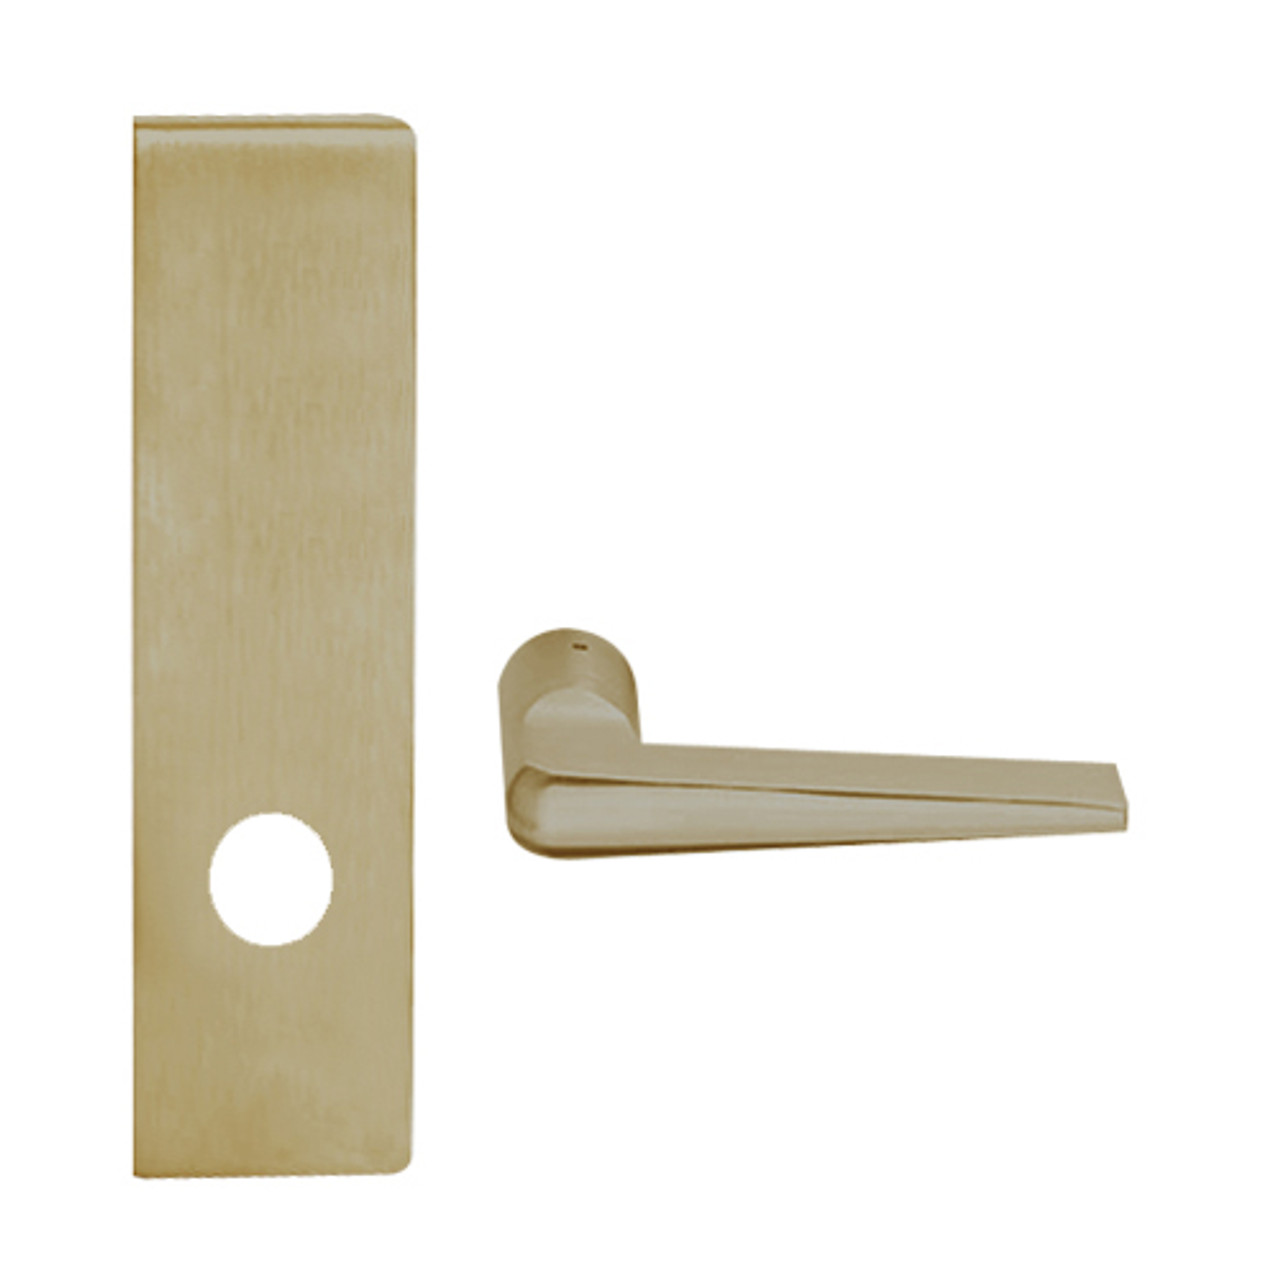 L0172-05N-613 Schlage L Series Double Dummy Trim Commercial Mortise Lock with 05 Cast Lever Design in Oil Rubbed Bronze